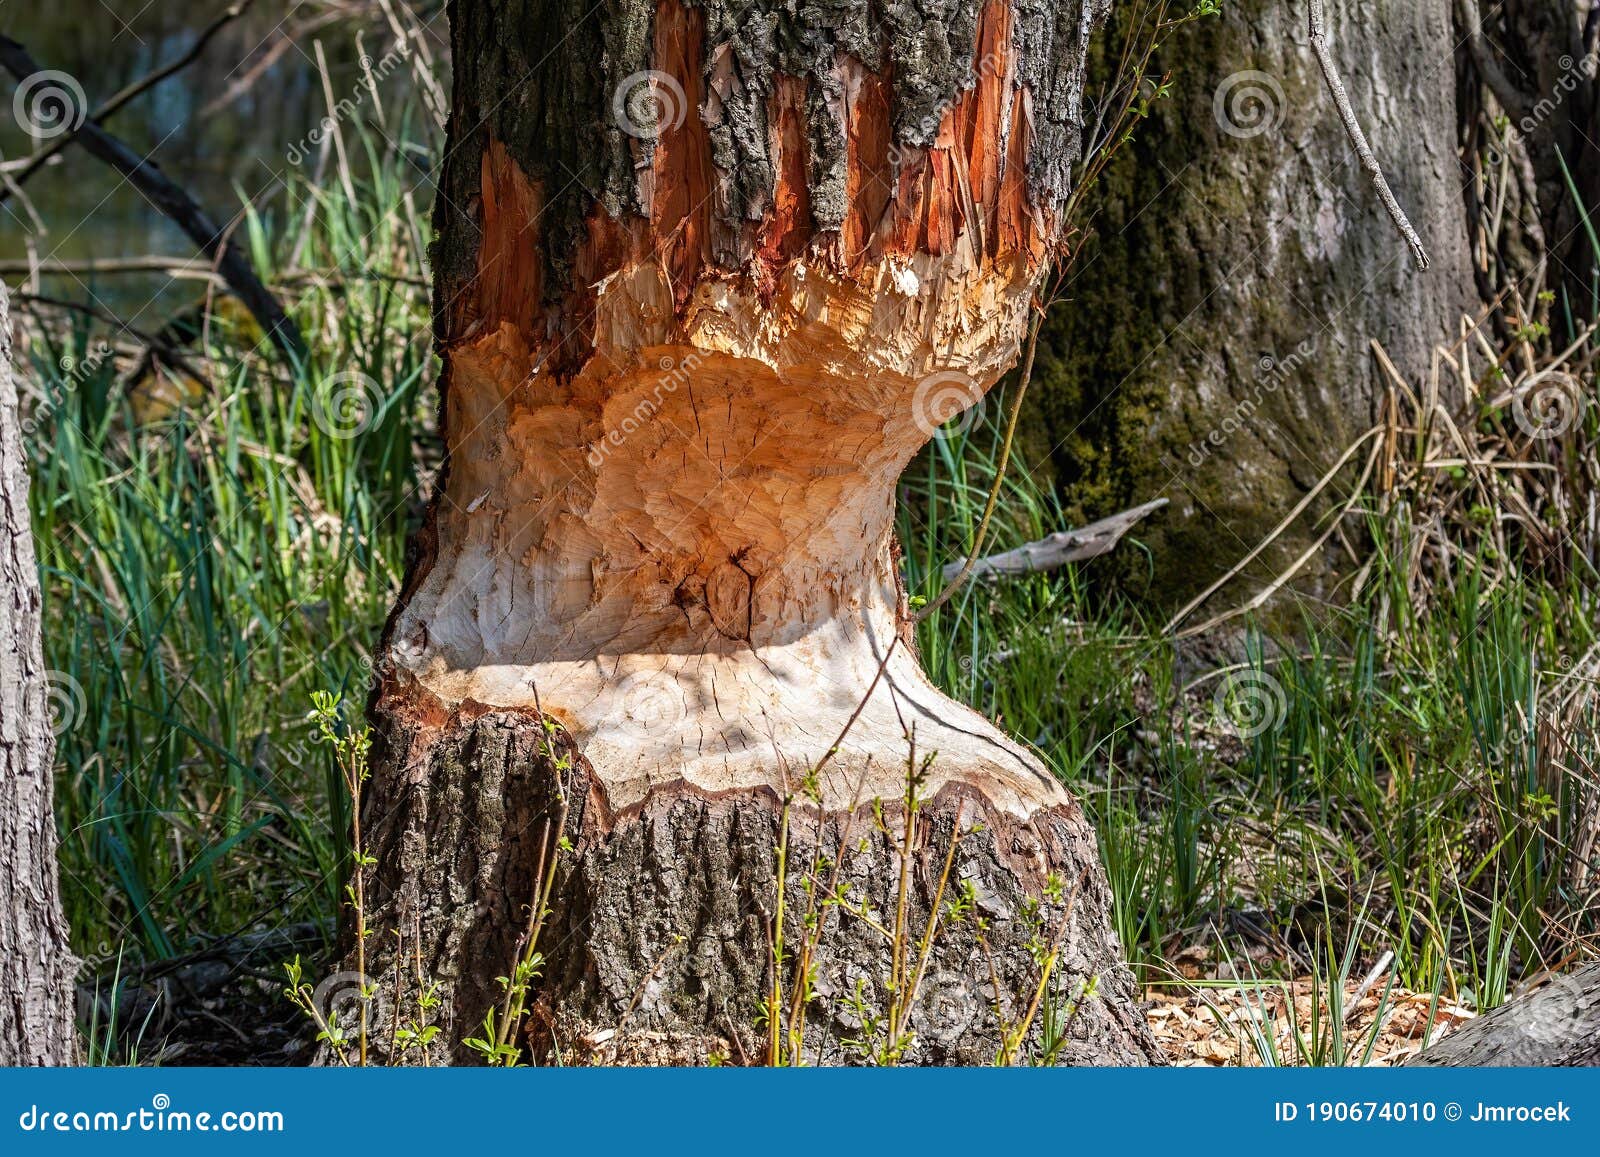 marks afters beaver teeth on a tree trunk in wetland